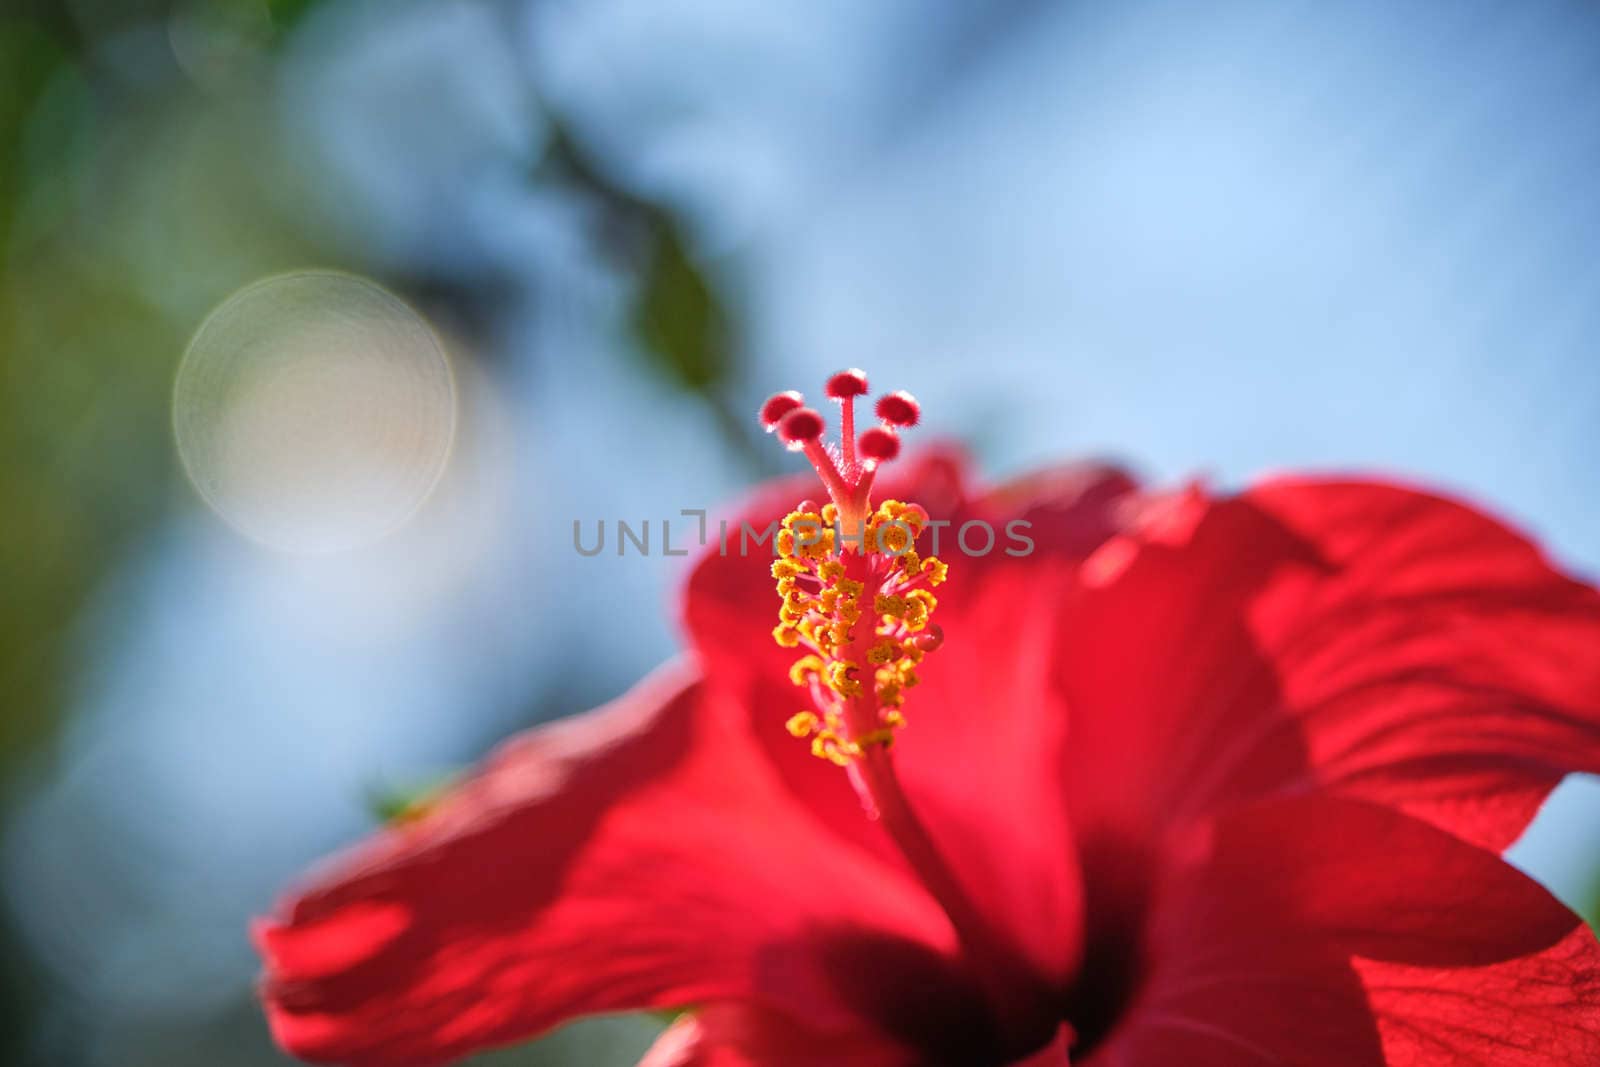 Red Hibiscus flower China rose,Chinese hibiscus,Hawaiian hibiscus in tropical garden of Tenerife,Canary Islands,Spain.Floral ba. Ckground.Selective focus by peerapixs